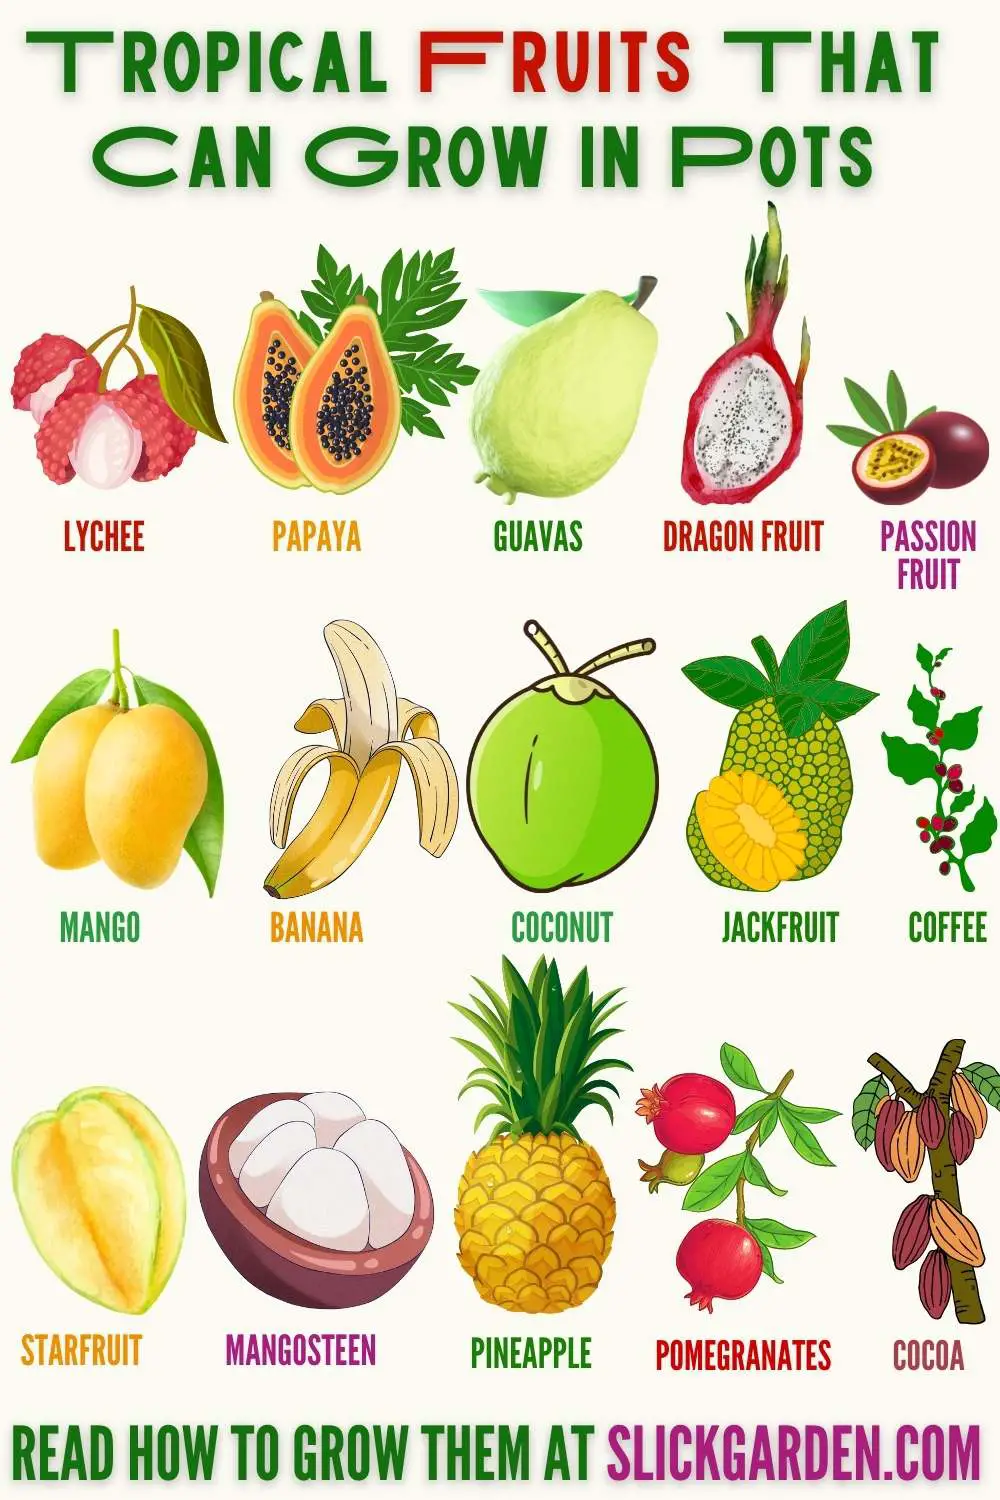 Tropical Fruits That Can Grow In Pots - infographic